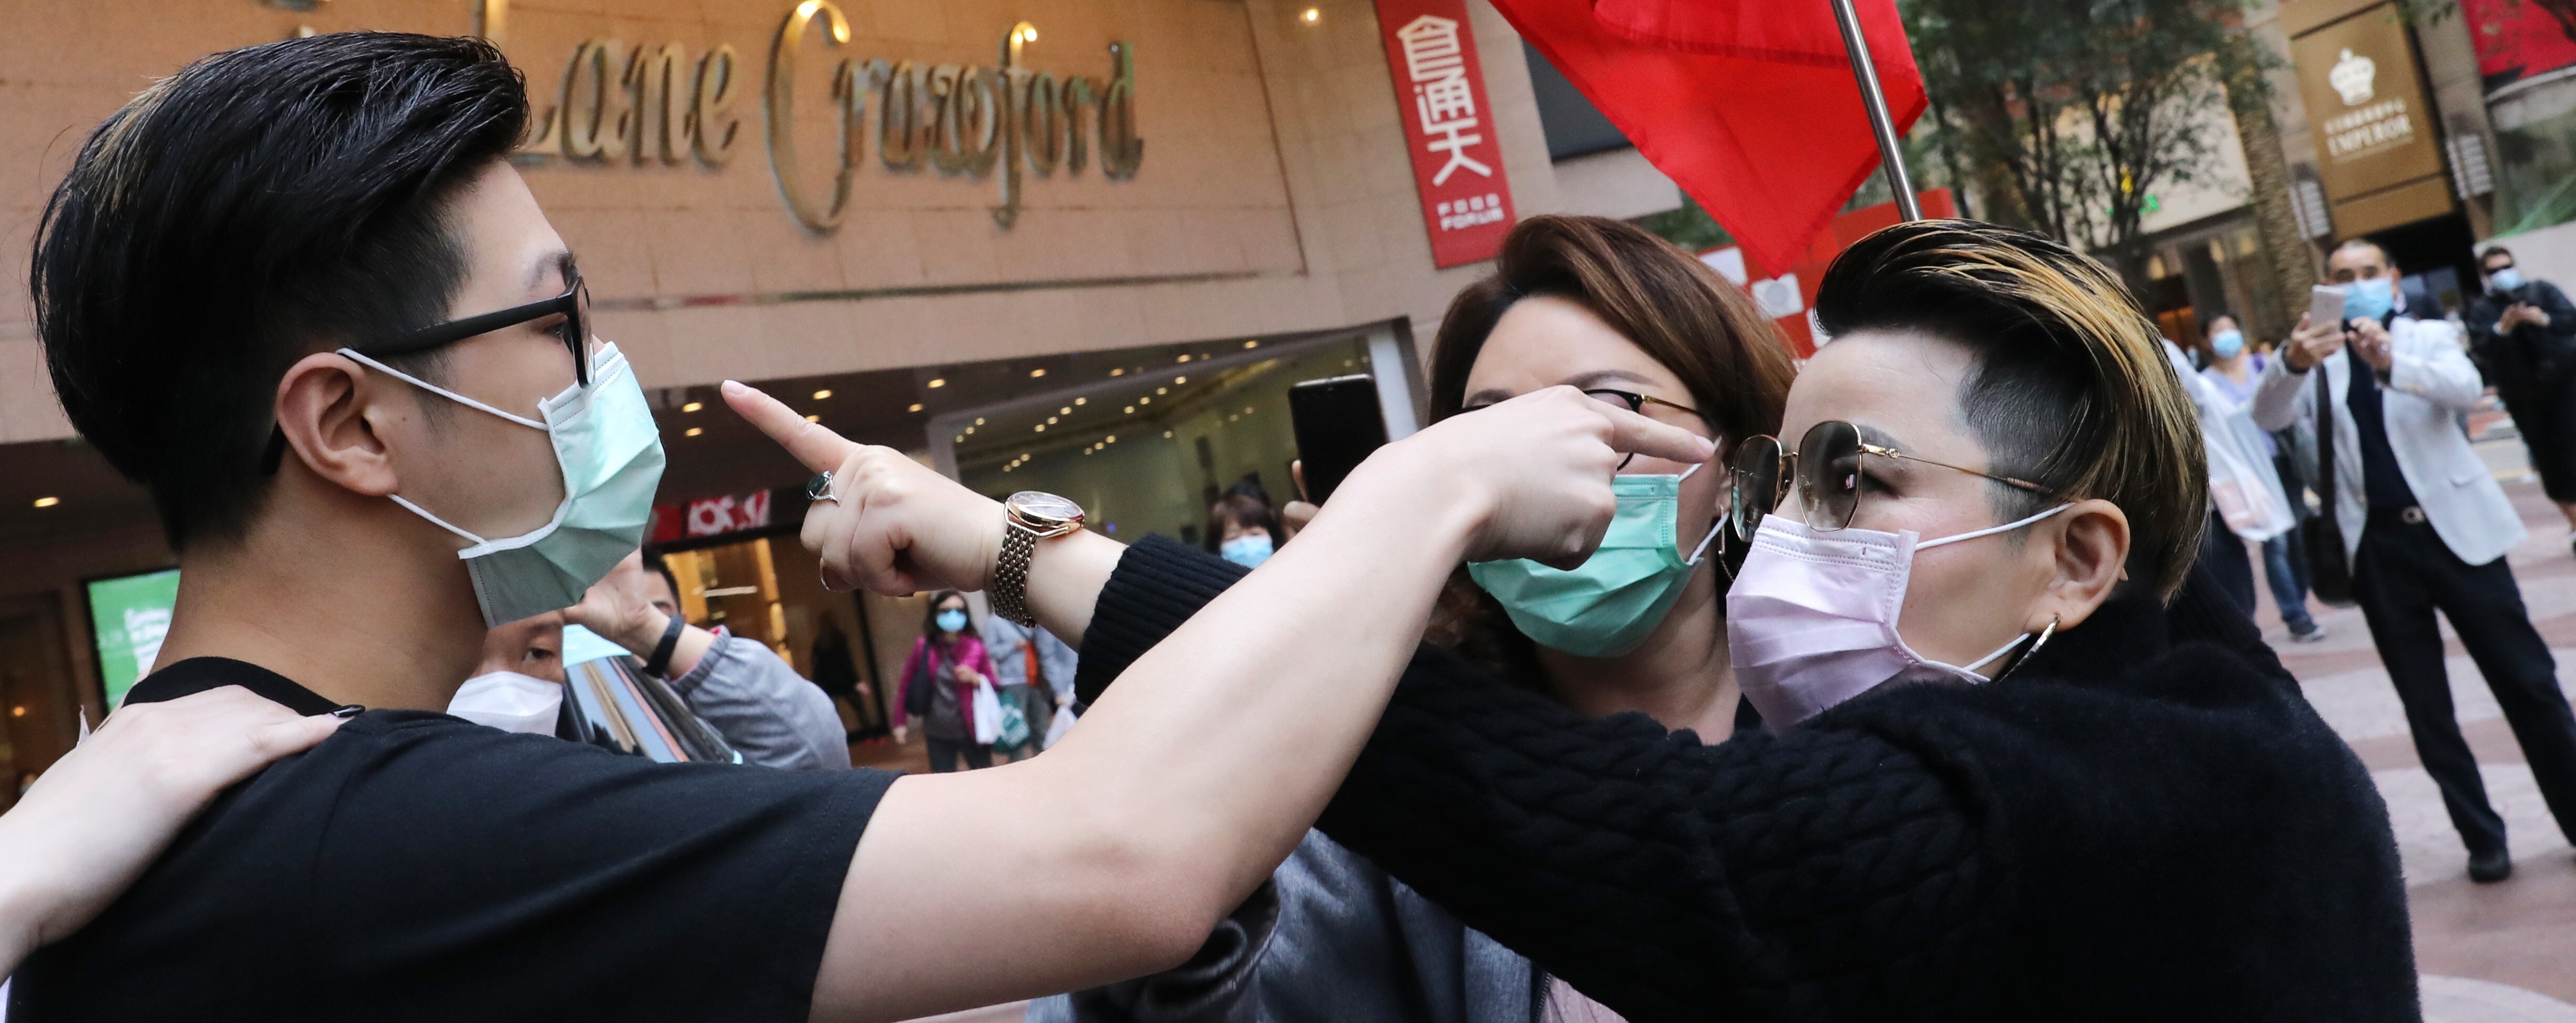 Pro-Beijing supporters clash with anti-government protesters at Times Square in Causeway Bay on February 20. The extradition bill protests, national security law, inequality, a perceived lack of opportunity and more have left Hong Kong society sharply divided. Photo: Dickson Lee